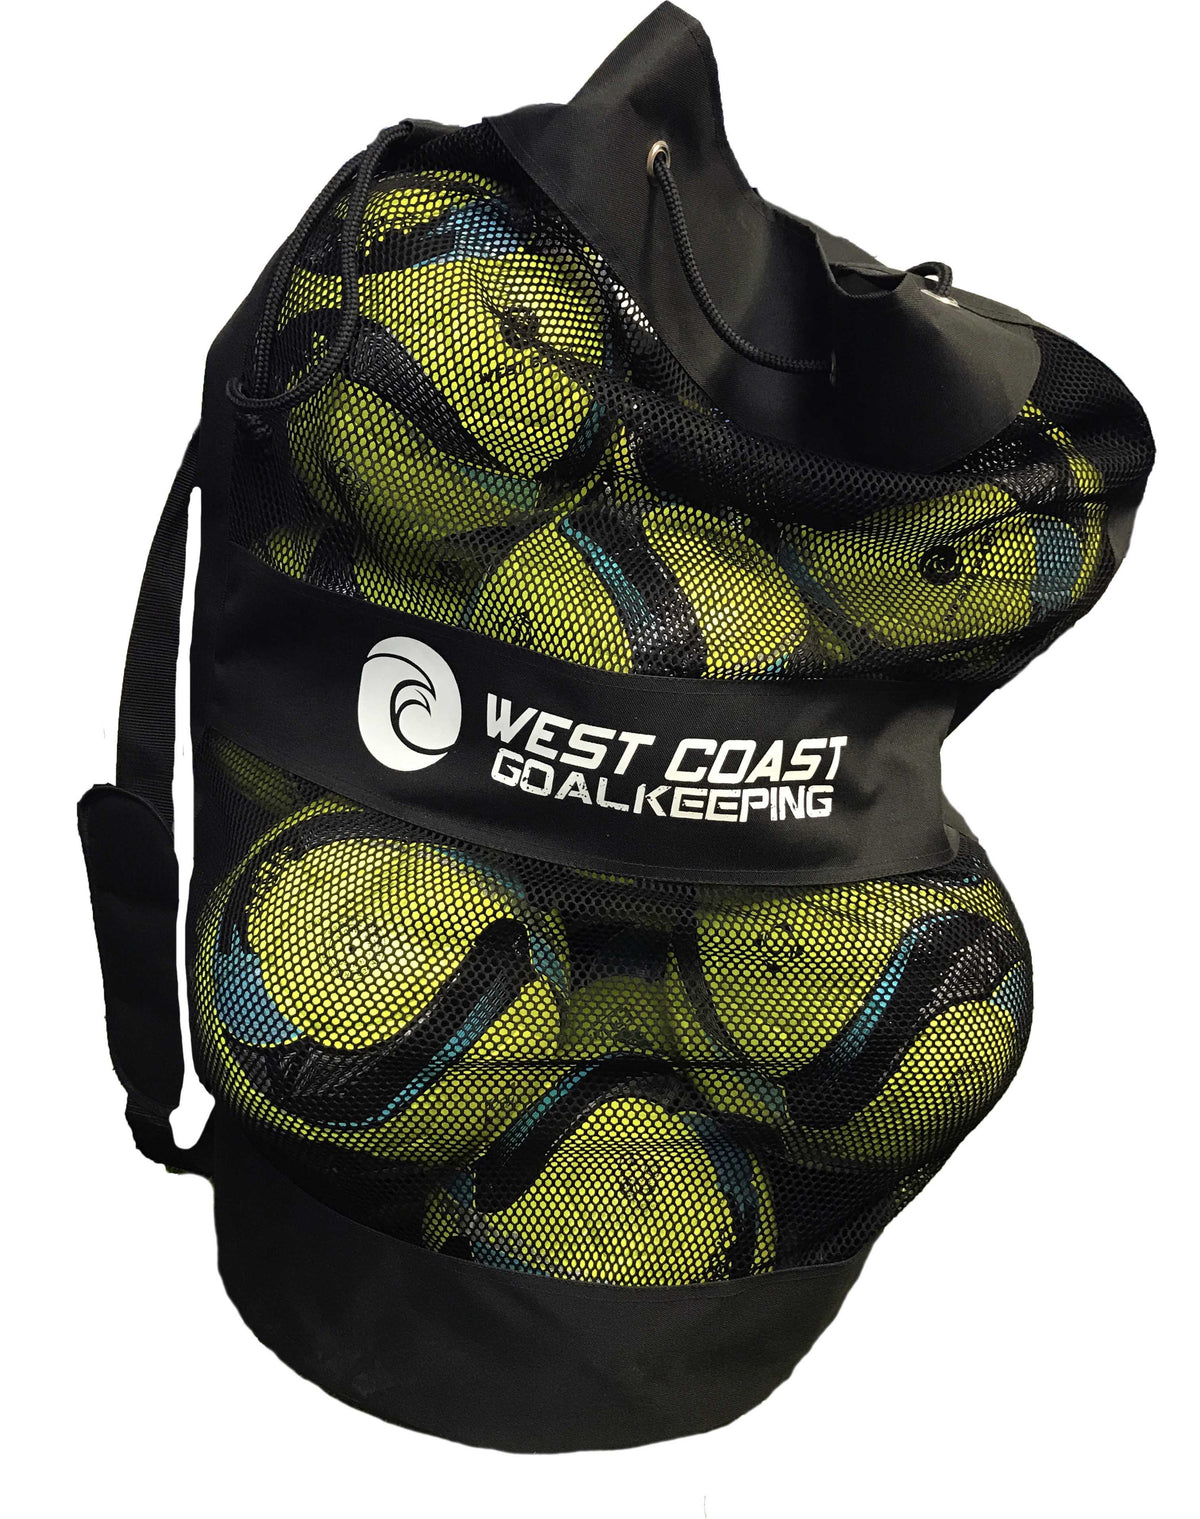 12 Match Balls with Free Carrying Bag - West Coast Goalkeeping